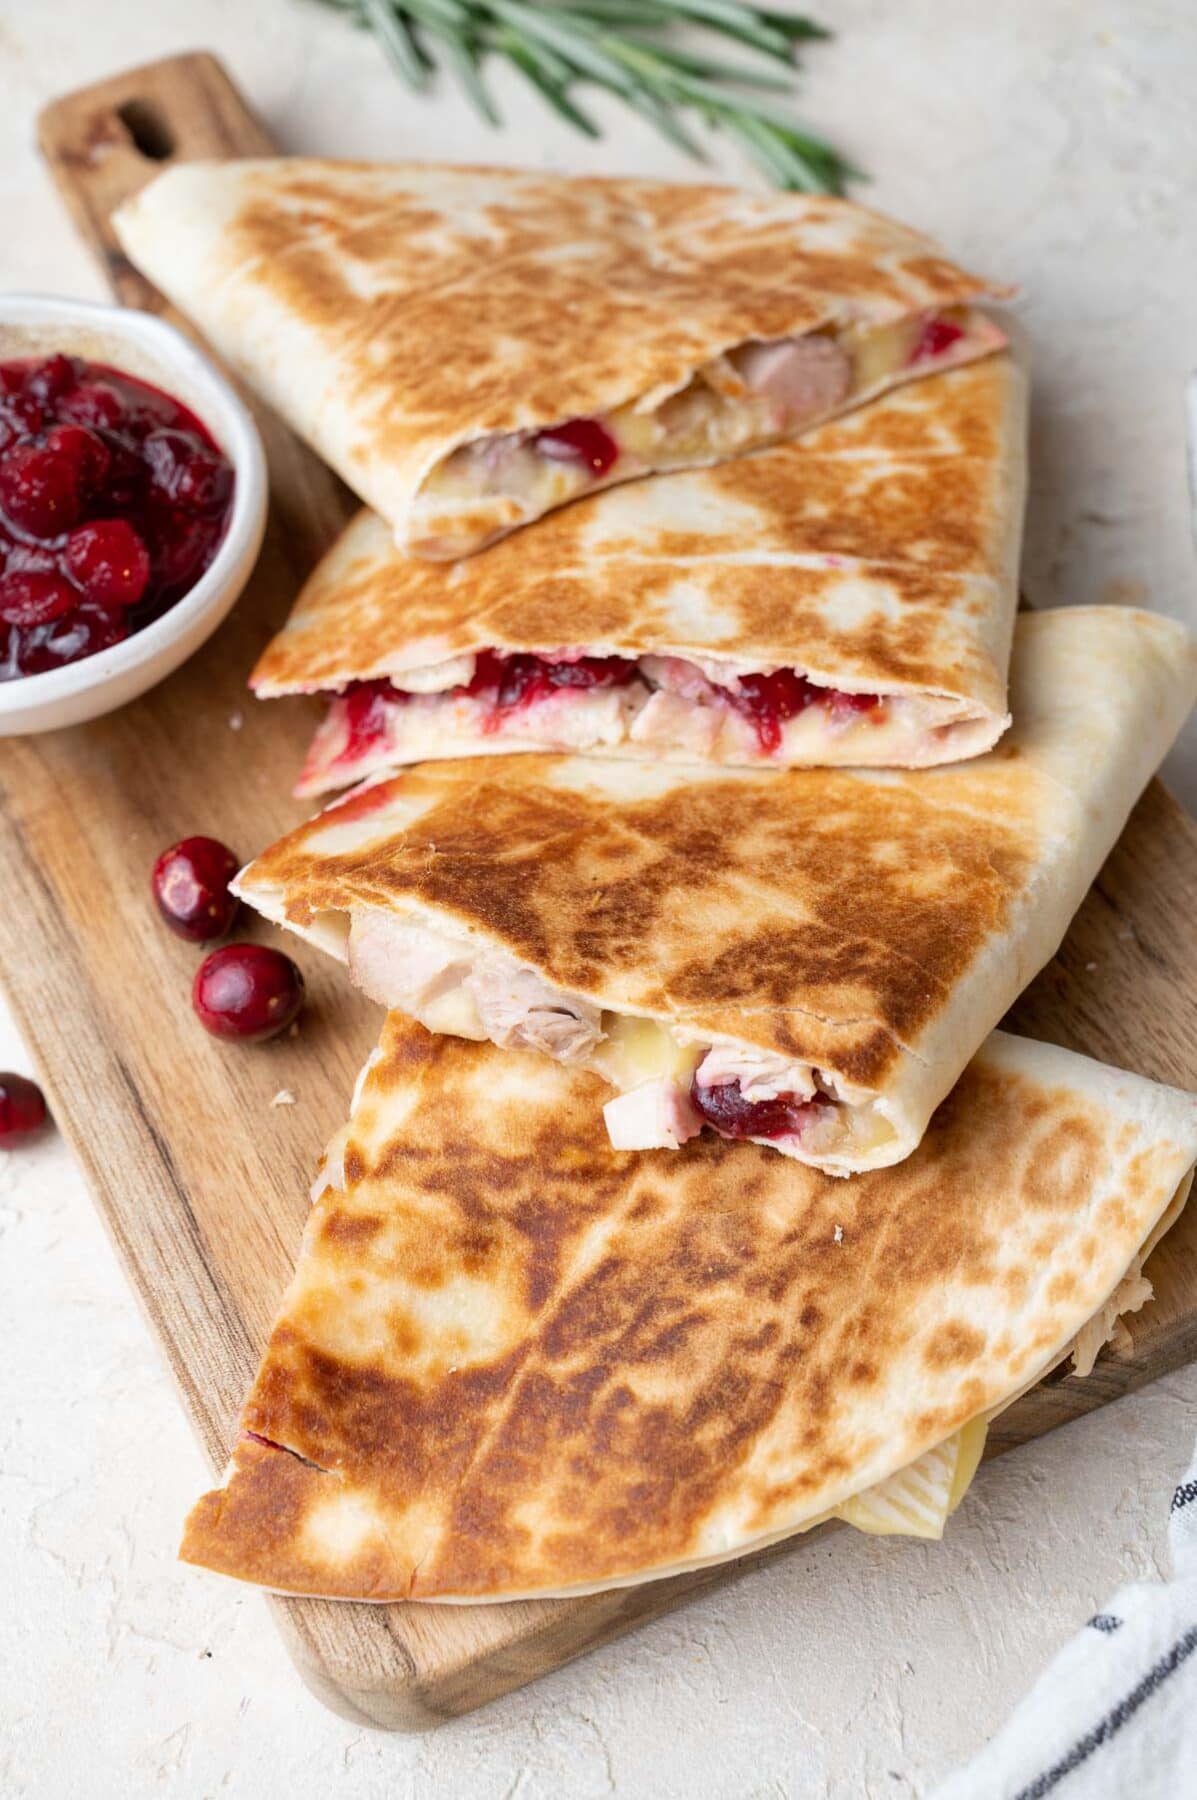 Turkey quesadillas with brie and cranberry sauce on a wooden board.